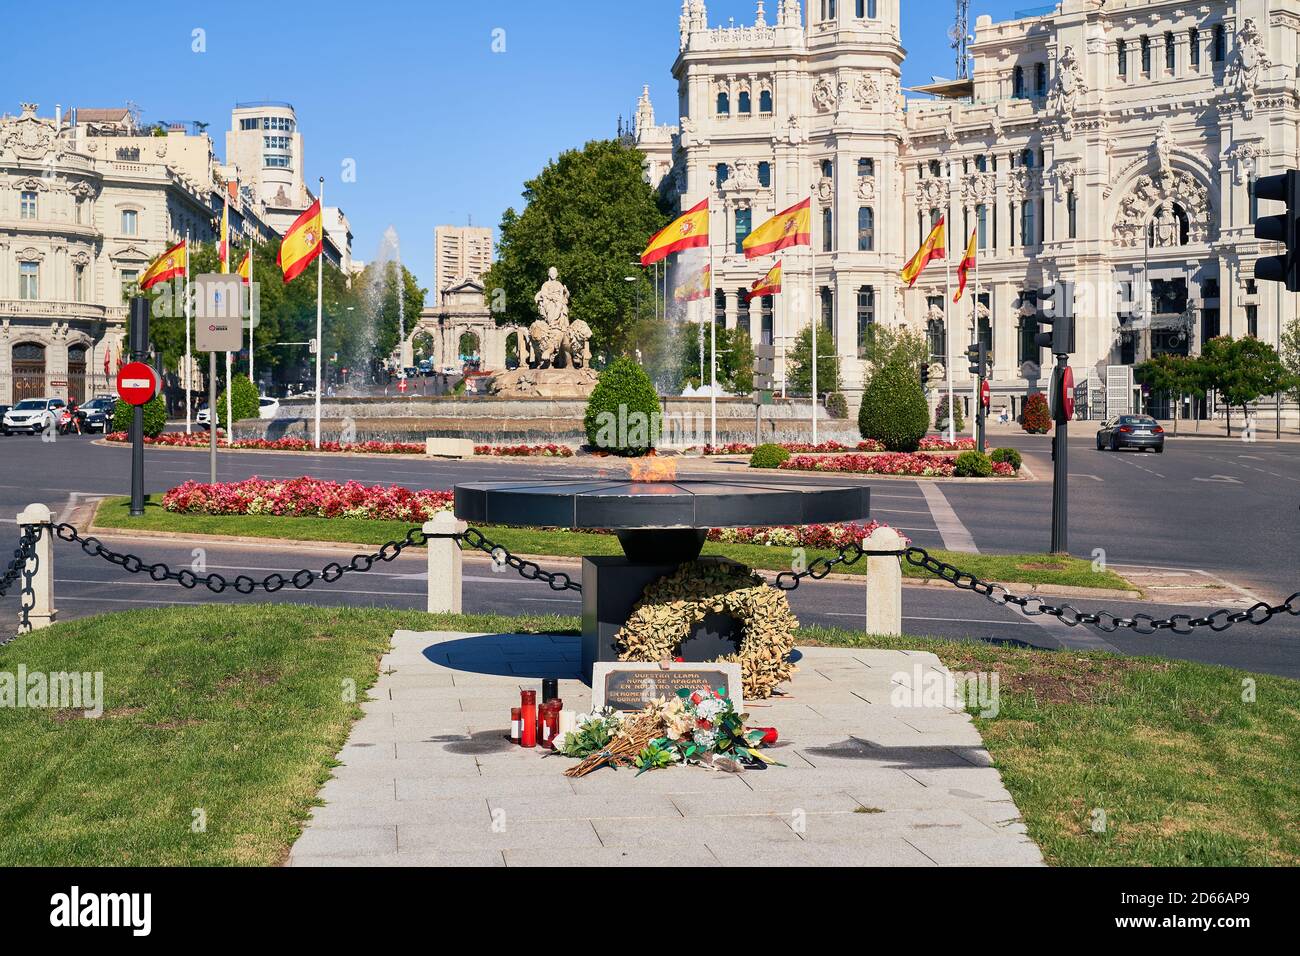 Your flame will never be extinguished in our hearts, memorial to COVID-19 victims Cibeles, Madrid, Spain, August 2020 Stock Photo